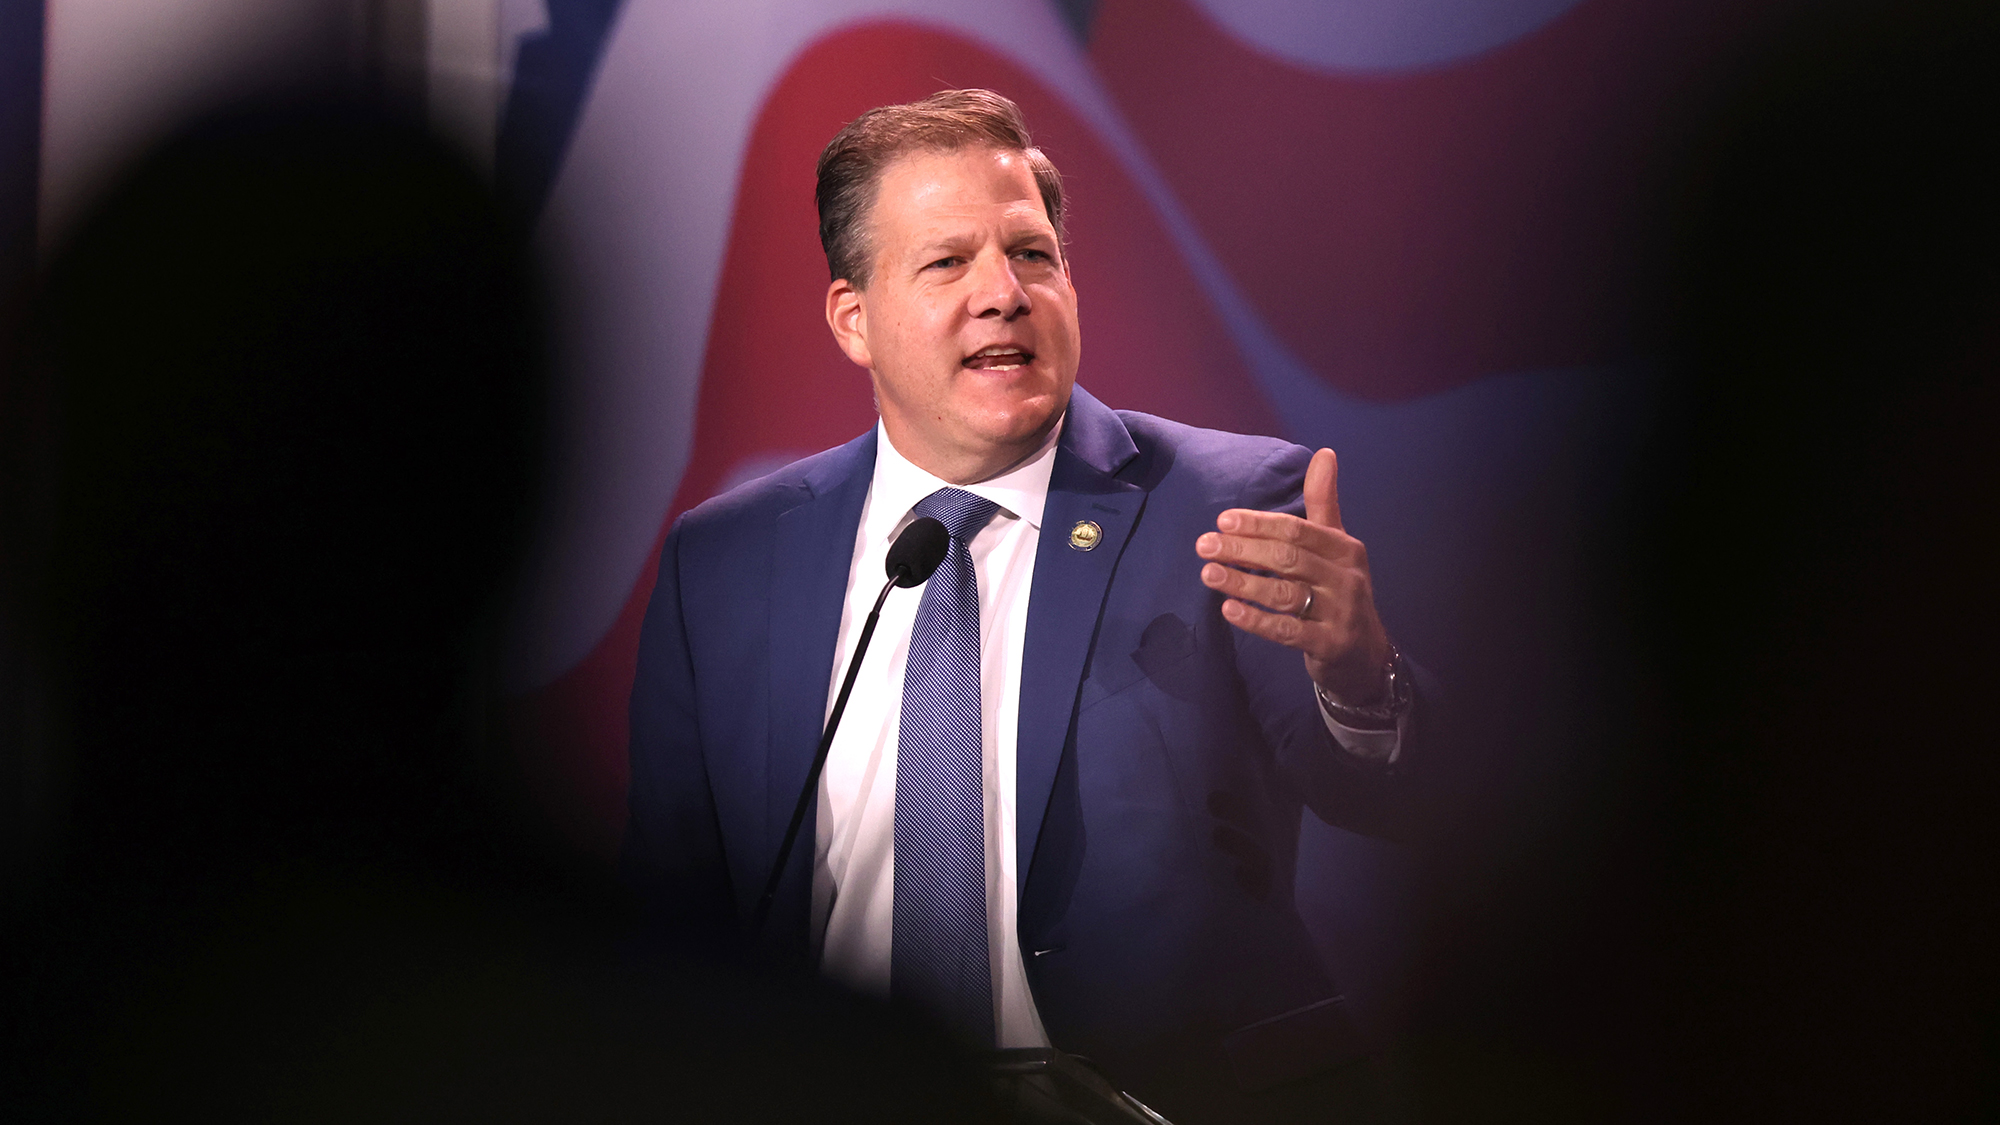 NextImg:Potential GOP presidential hopeful Sununu: Trump shouldn't be 2024 nominee, but indictment bolsters his base